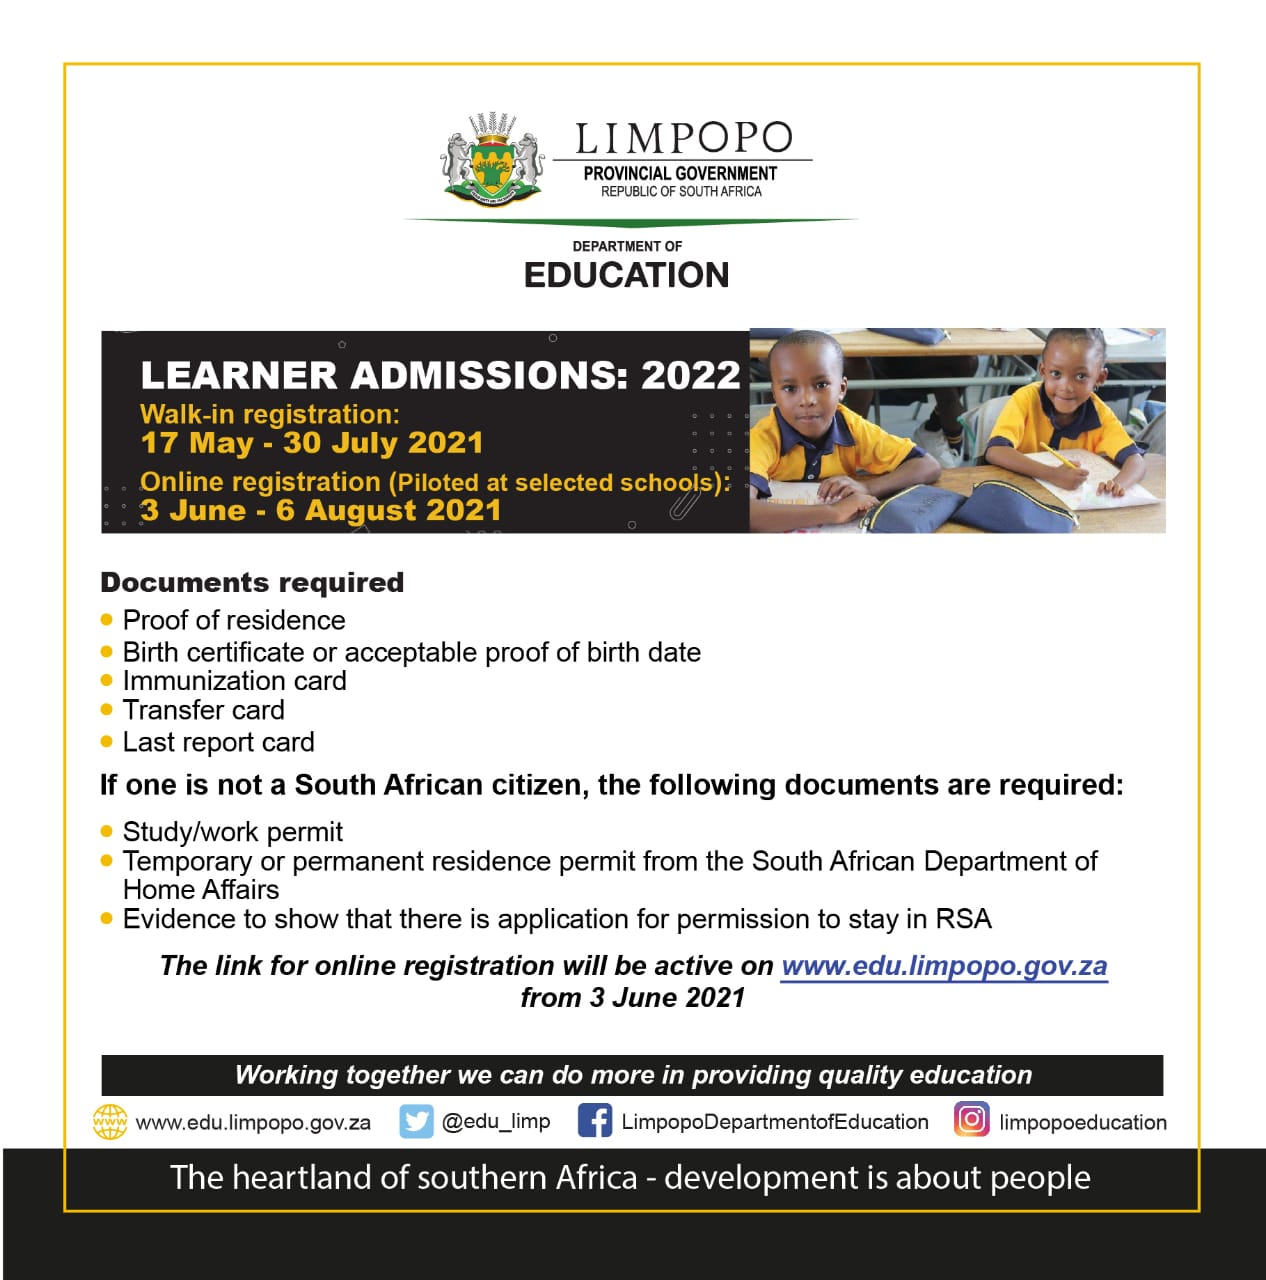 Limpopo Department of Education